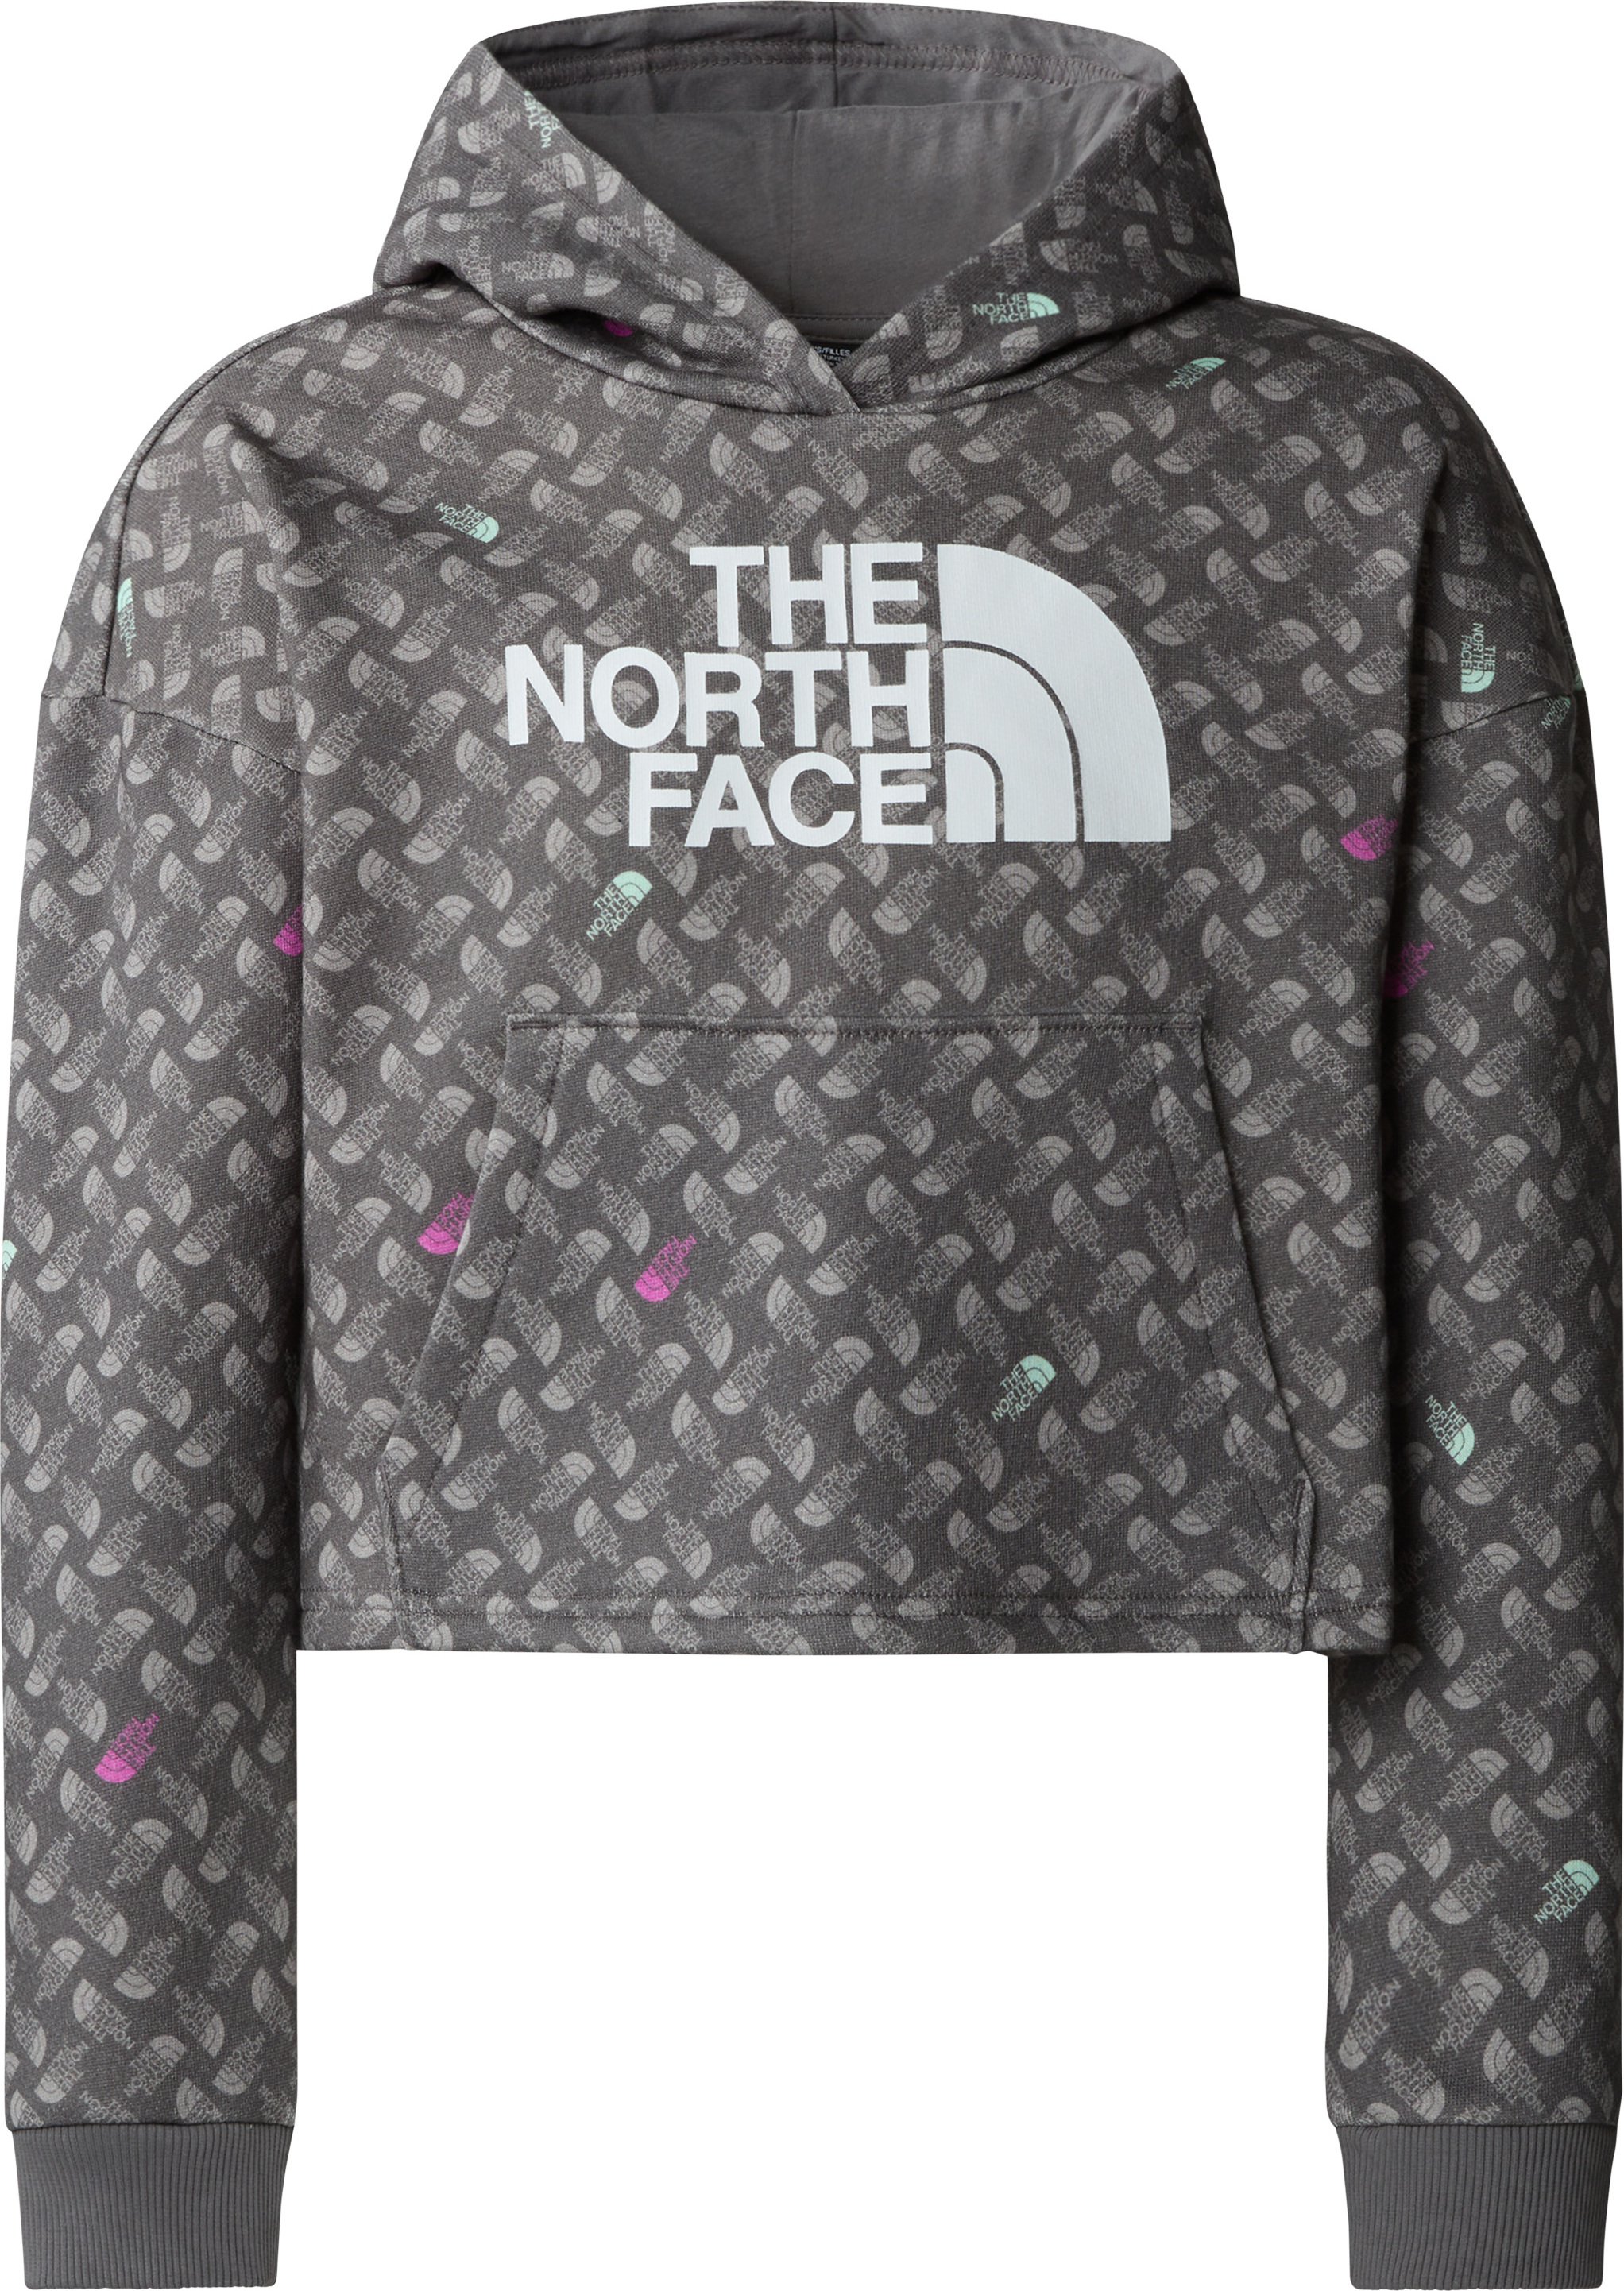 The North Face The North Face G Drew Peak Light Hoodie Print Smoked Pearl TNF Shadow L, Smoked Pearl Tnf Shadow